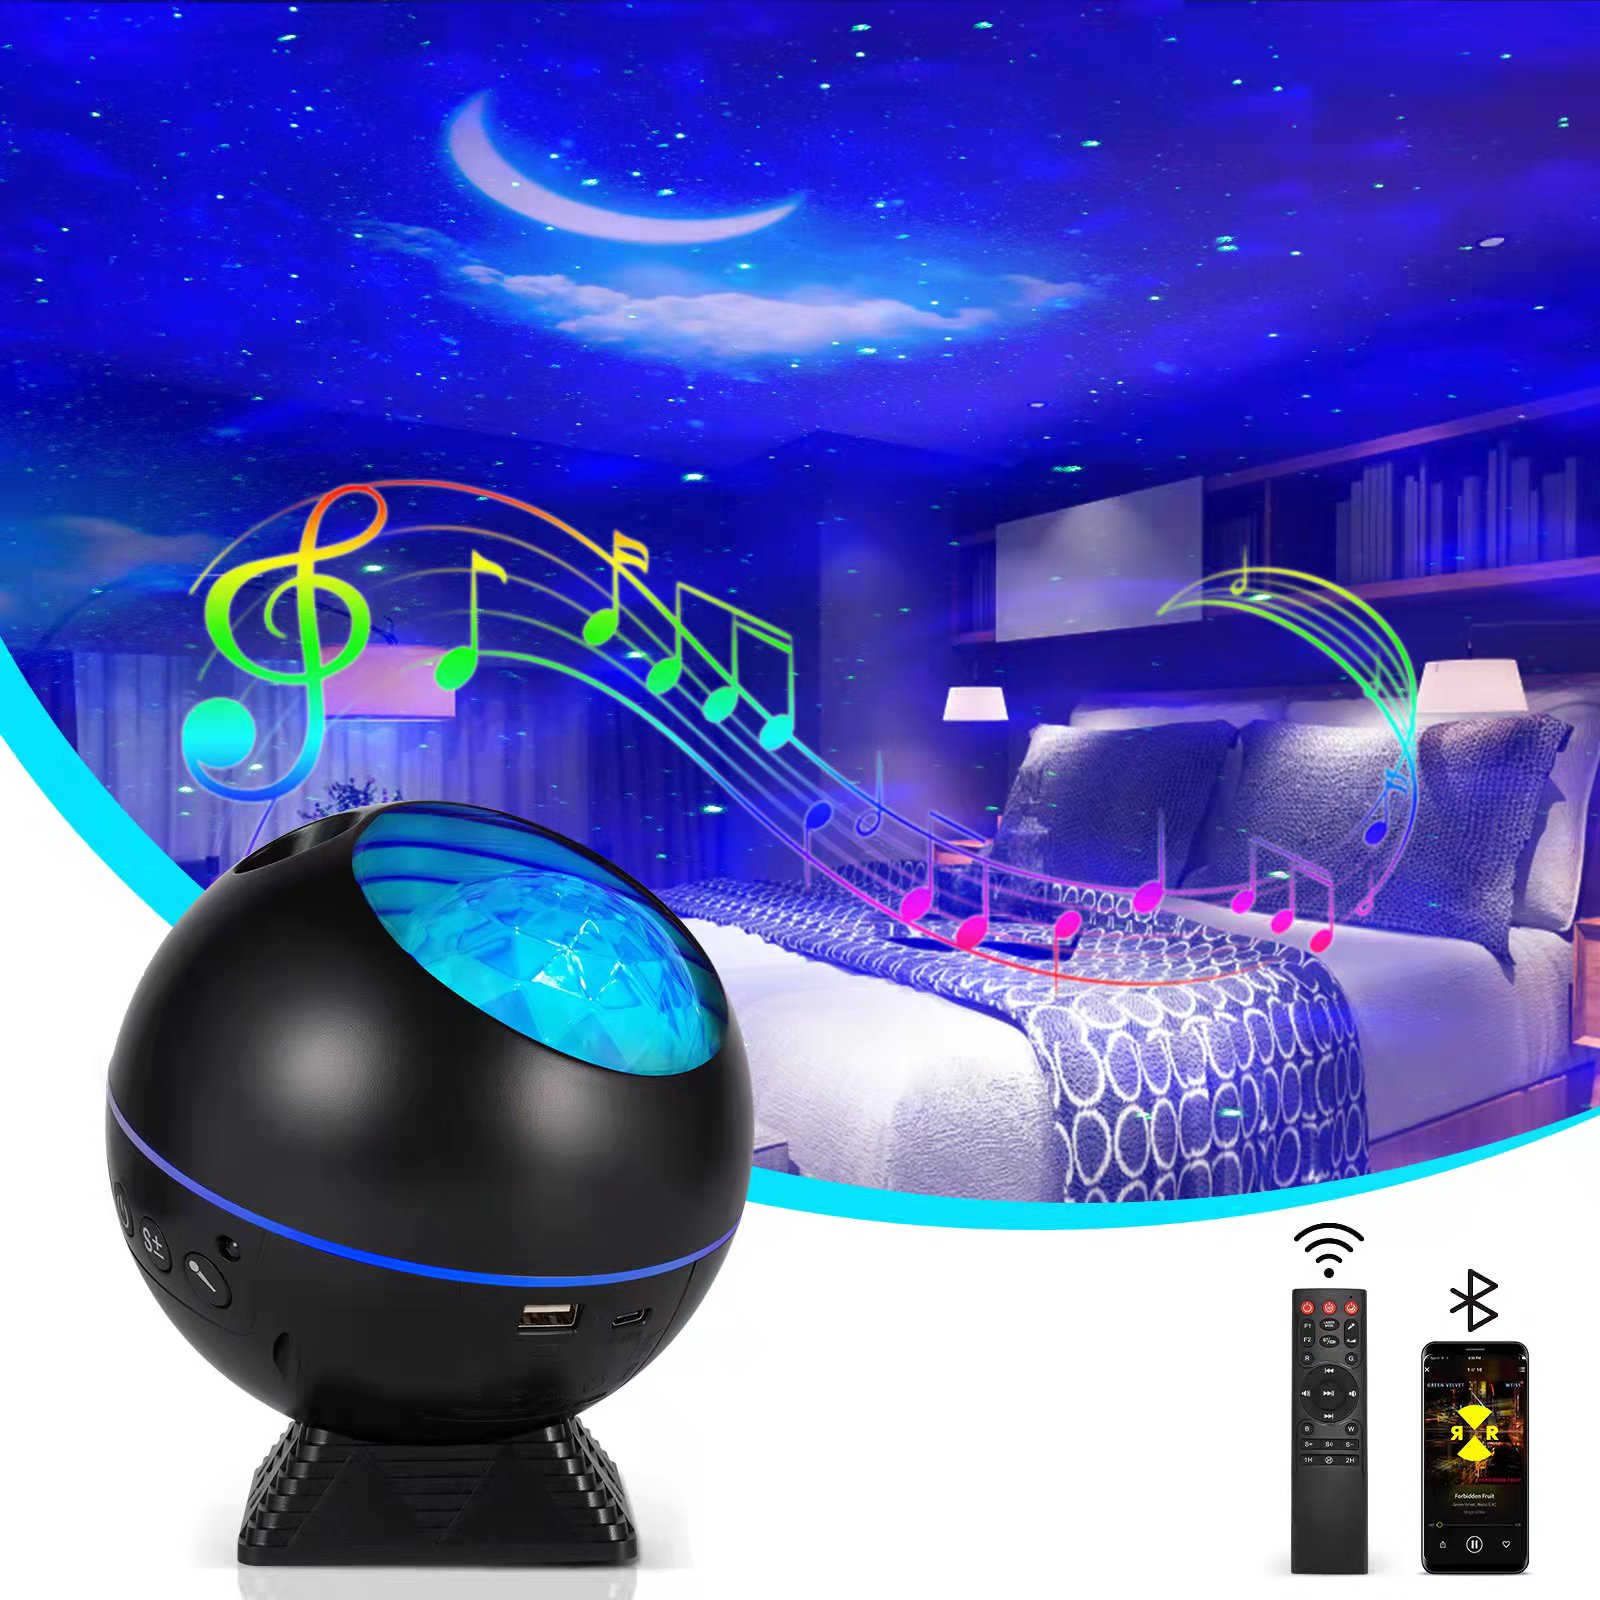 Star Projector,Galaxy Projector Night Light Built-in Stereo Bluetooth Speaker, LED Nebula Starry Sky Cloud Moon Projector Lamp with Remote Manufacturers, Star Projector,Galaxy Projector Night Light Built-in Stereo Bluetooth Speaker, LED Nebula Starry Sky Cloud Moon Projector Lamp with Remote Factory, Supply Star Projector,Galaxy Projector Night Light Built-in Stereo Bluetooth Speaker, LED Nebula Starry Sky Cloud Moon Projector Lamp with Remote